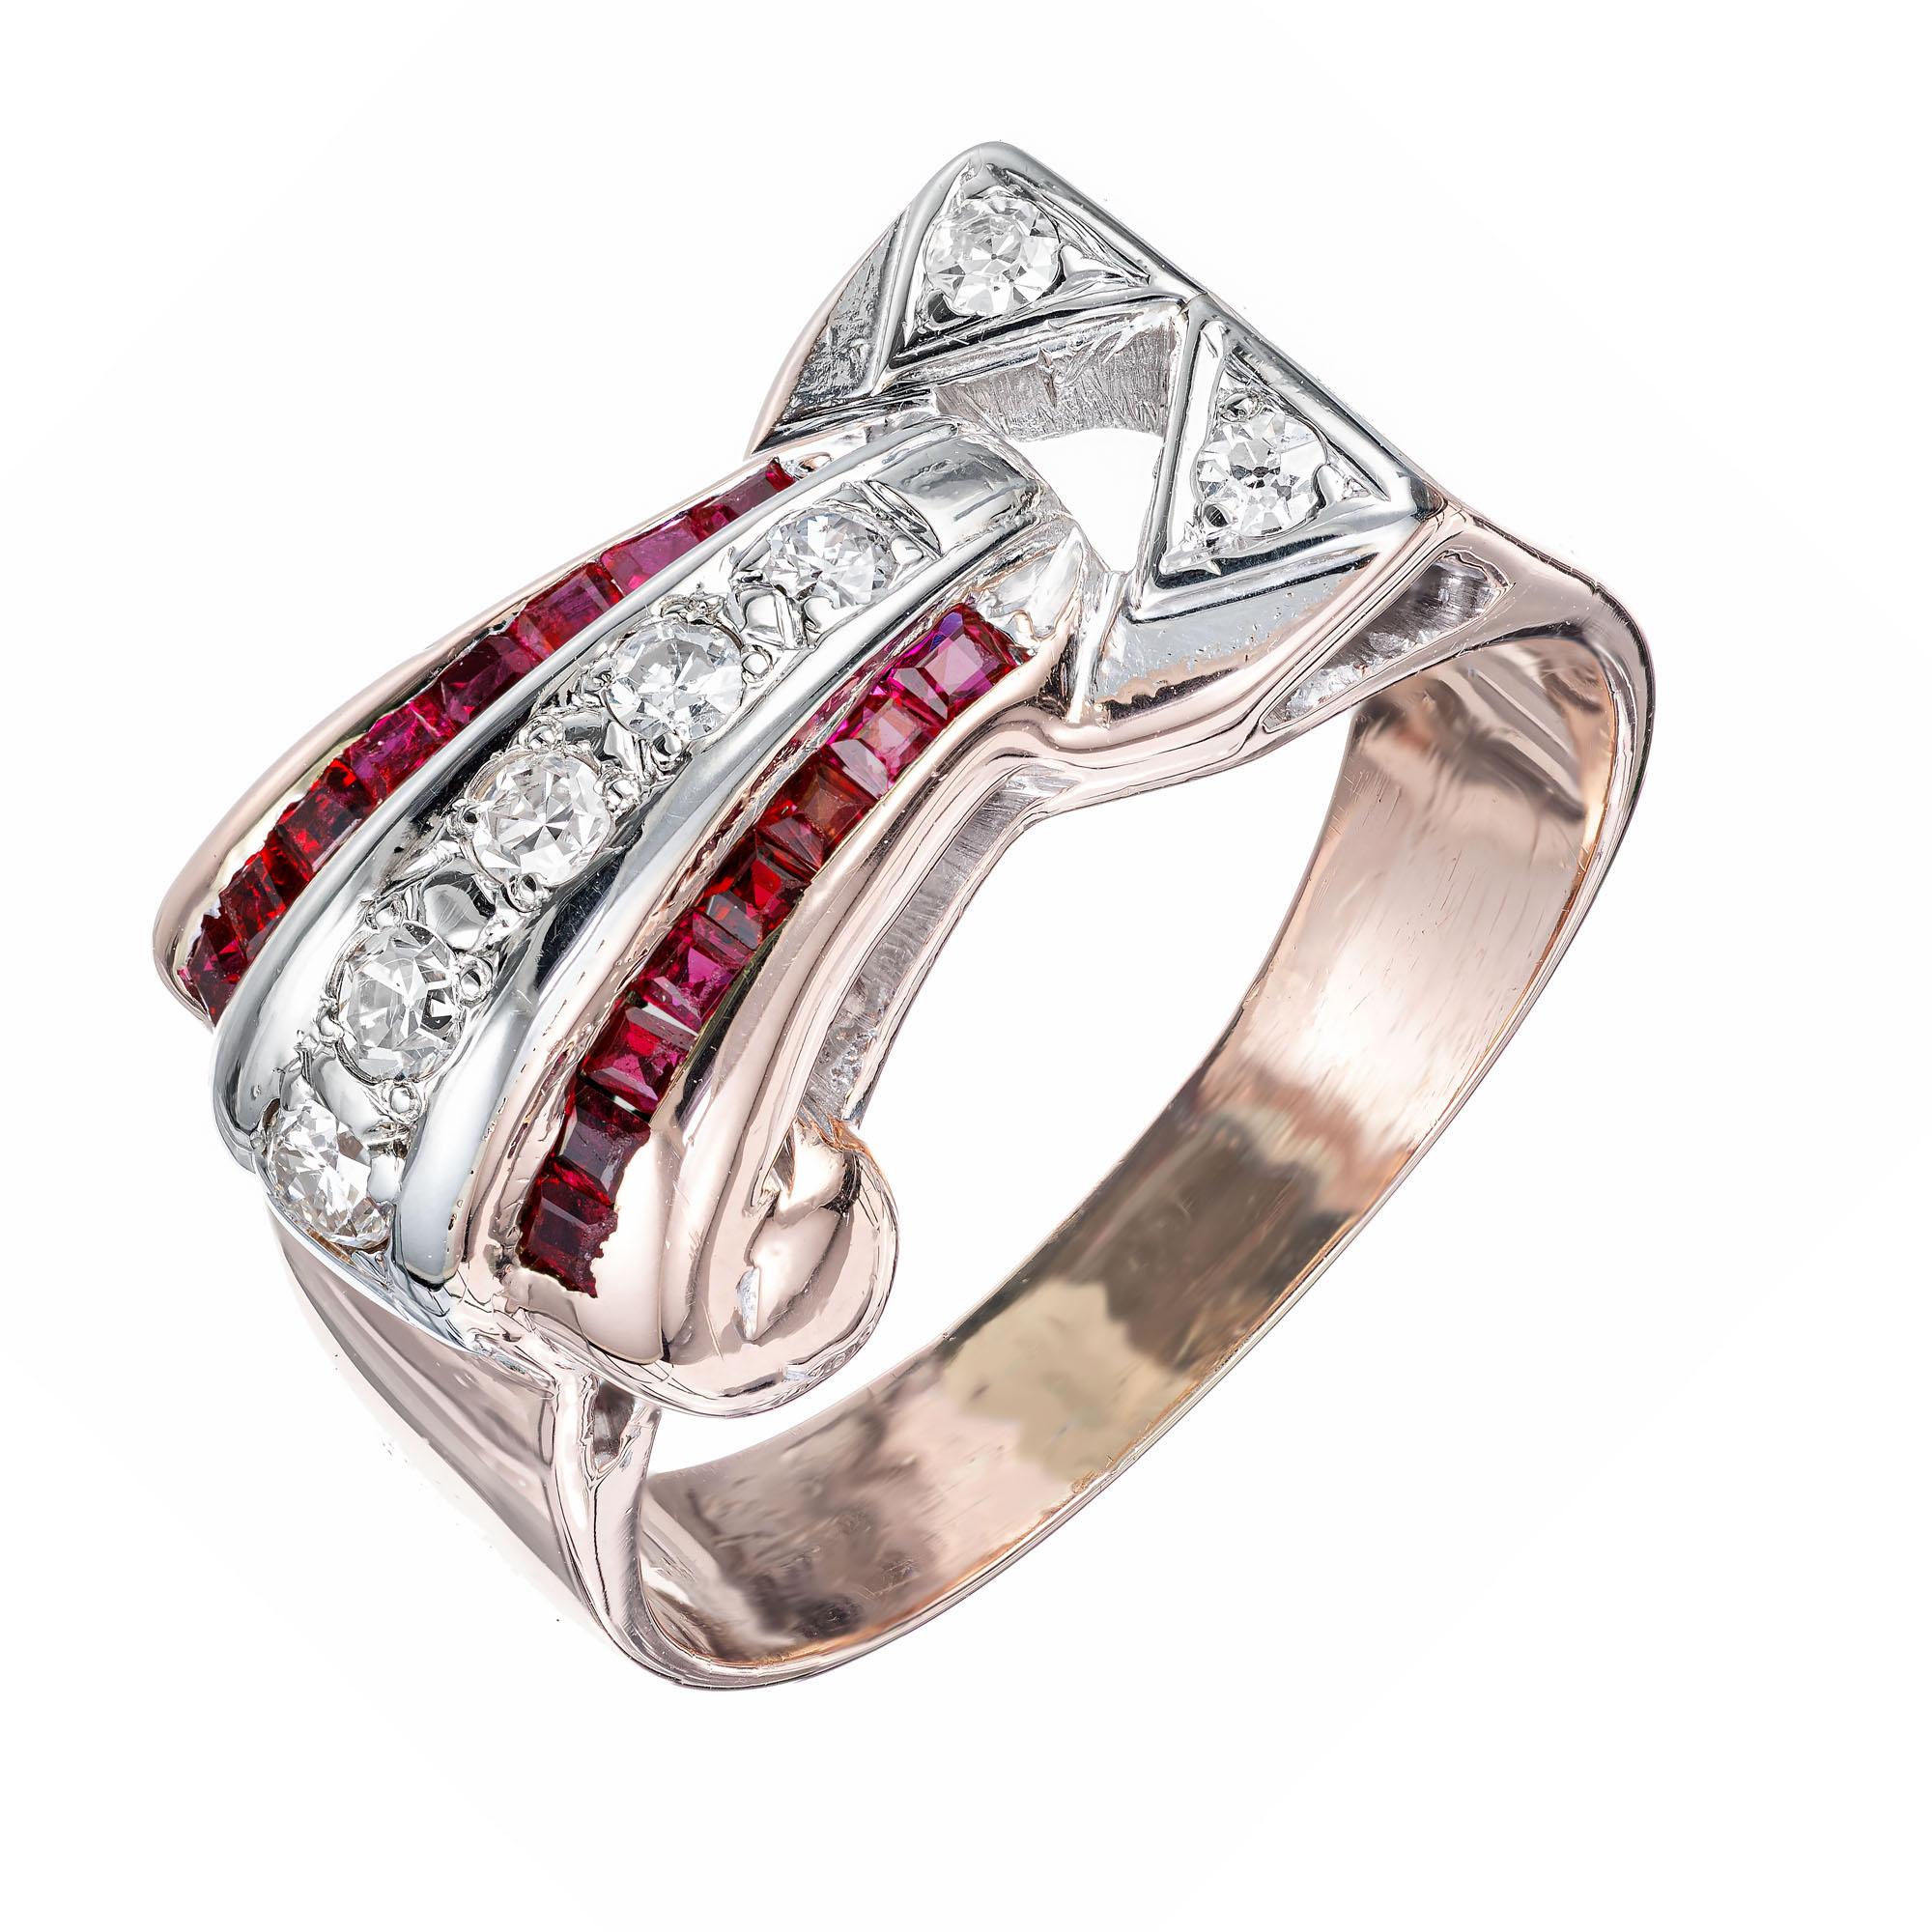 1930's Retro diamond and ruby 14k rose gold and palladium band ring. 16 square cut rubies with a row of 5 diamonds in the center and 2 accent diamonds. Circa 1935.

7 single cut diamonds, approx. total weight .21cts, F – G, VS
16 square gem red